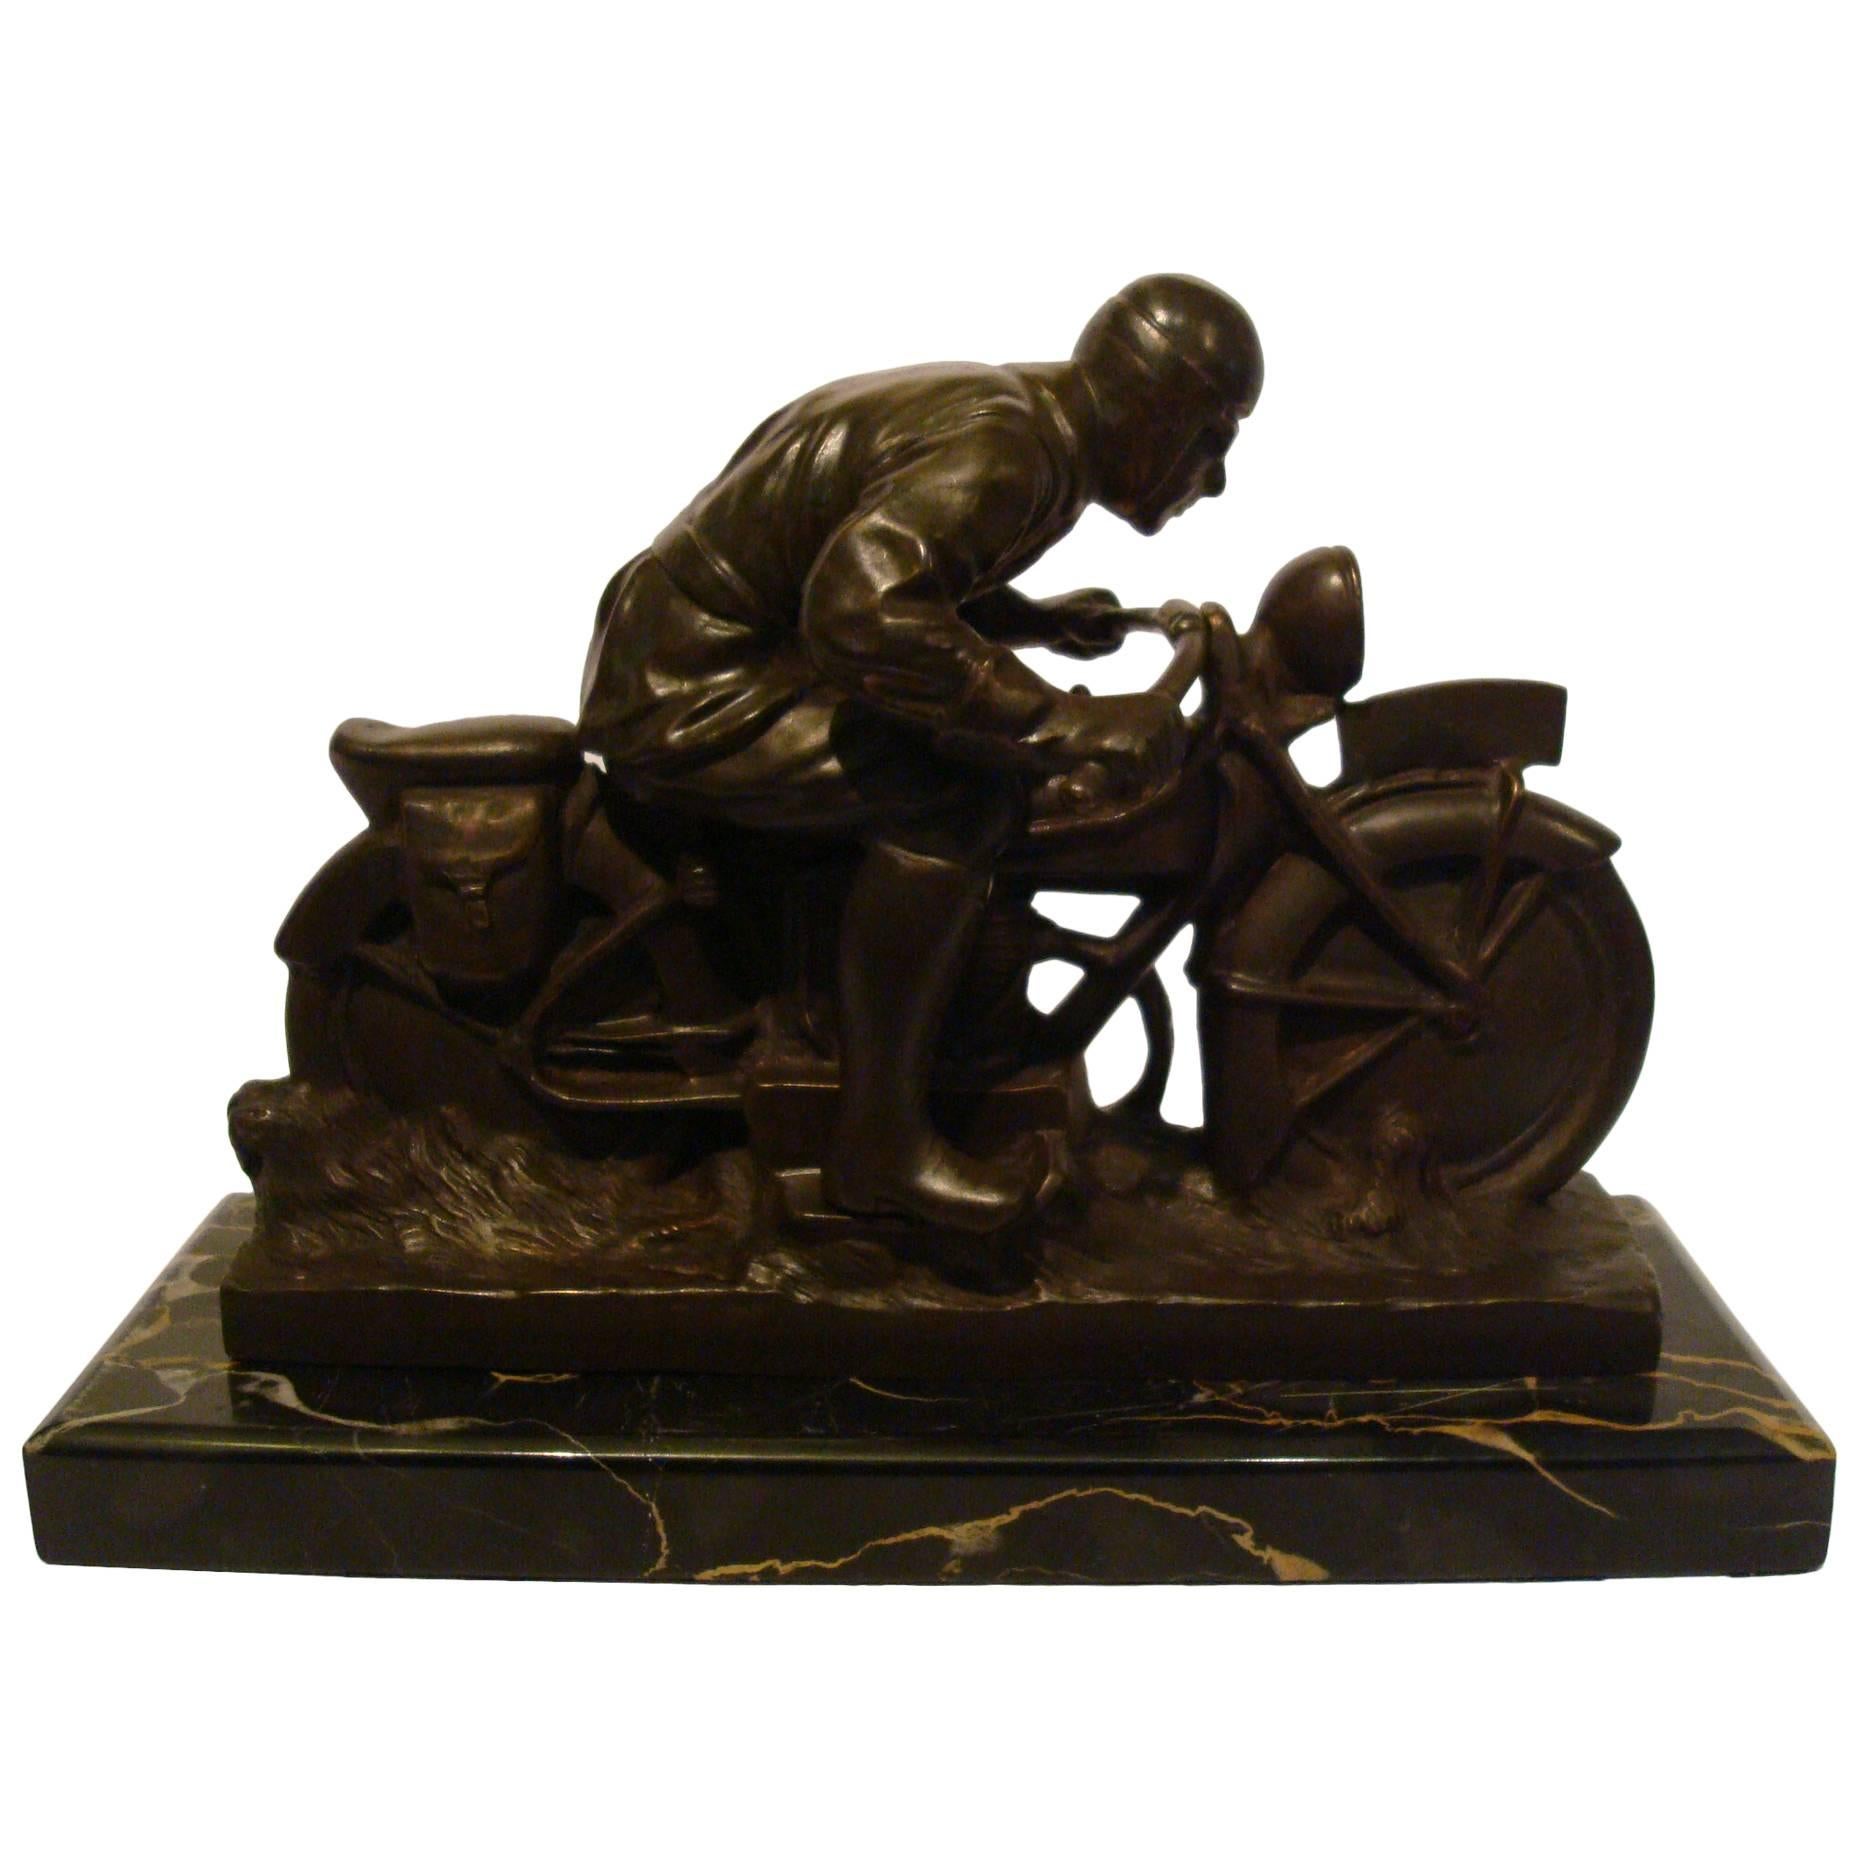 Motorcycle Bronze with Driver Desk Piece